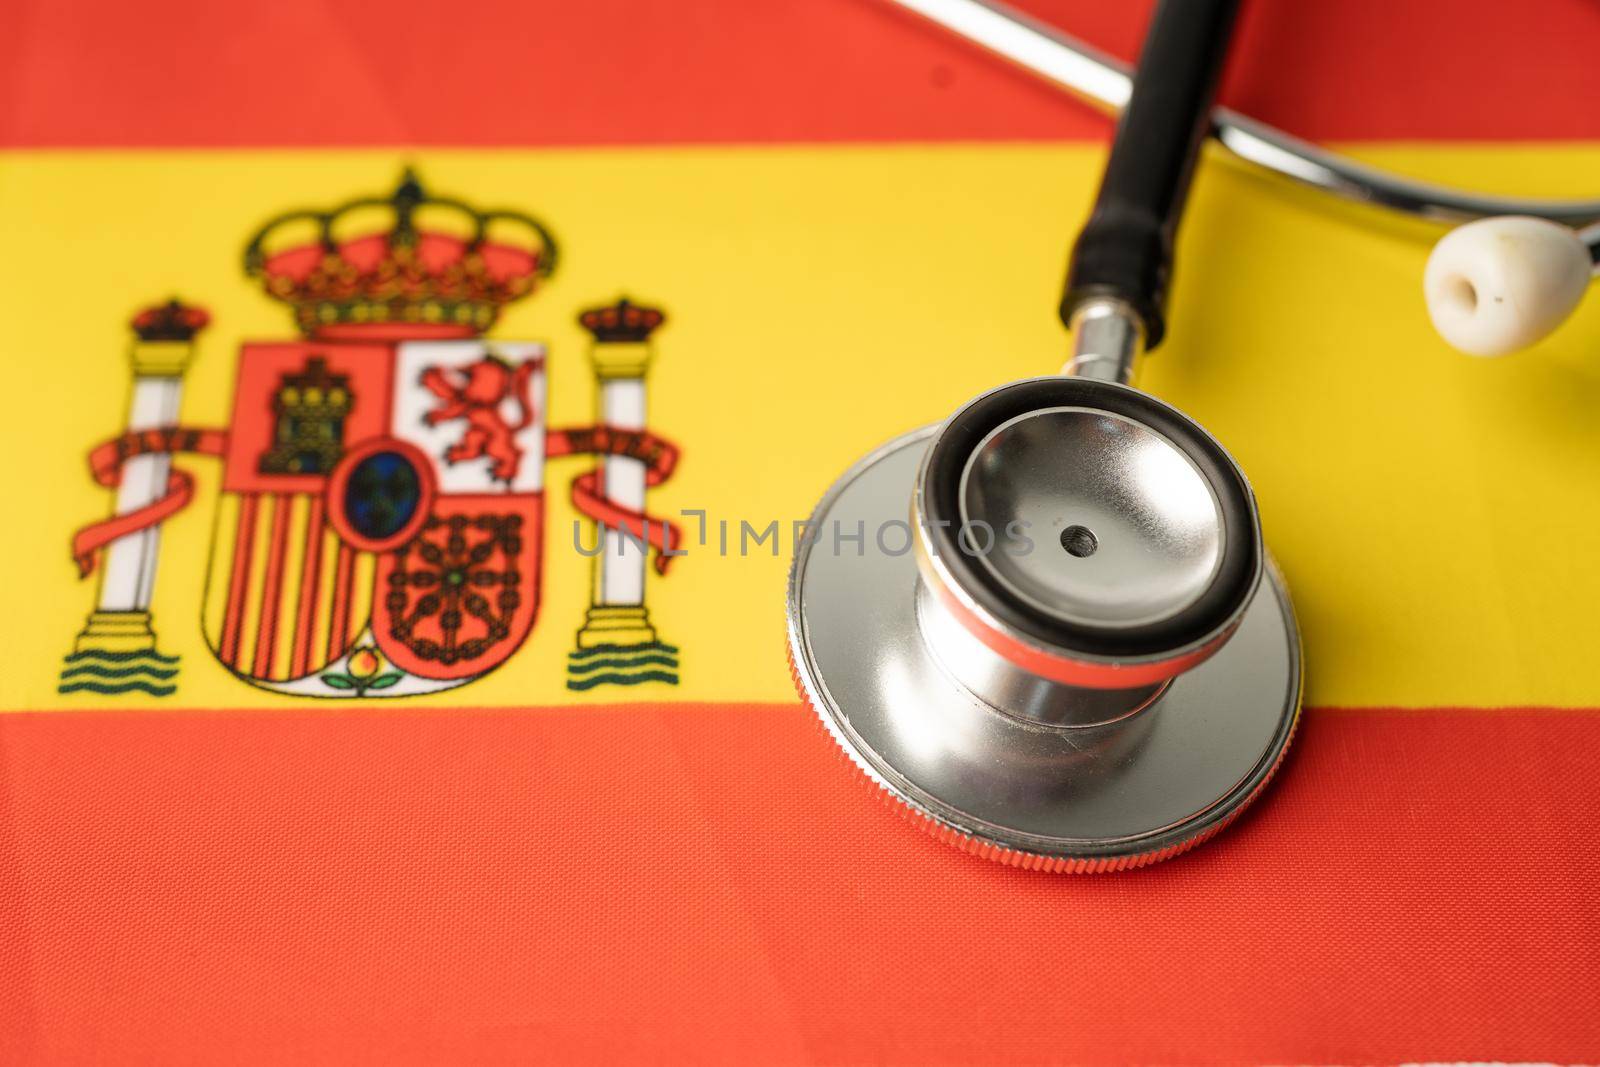 Black stethoscope on Spain flag background, Business and finance concept. by pamai